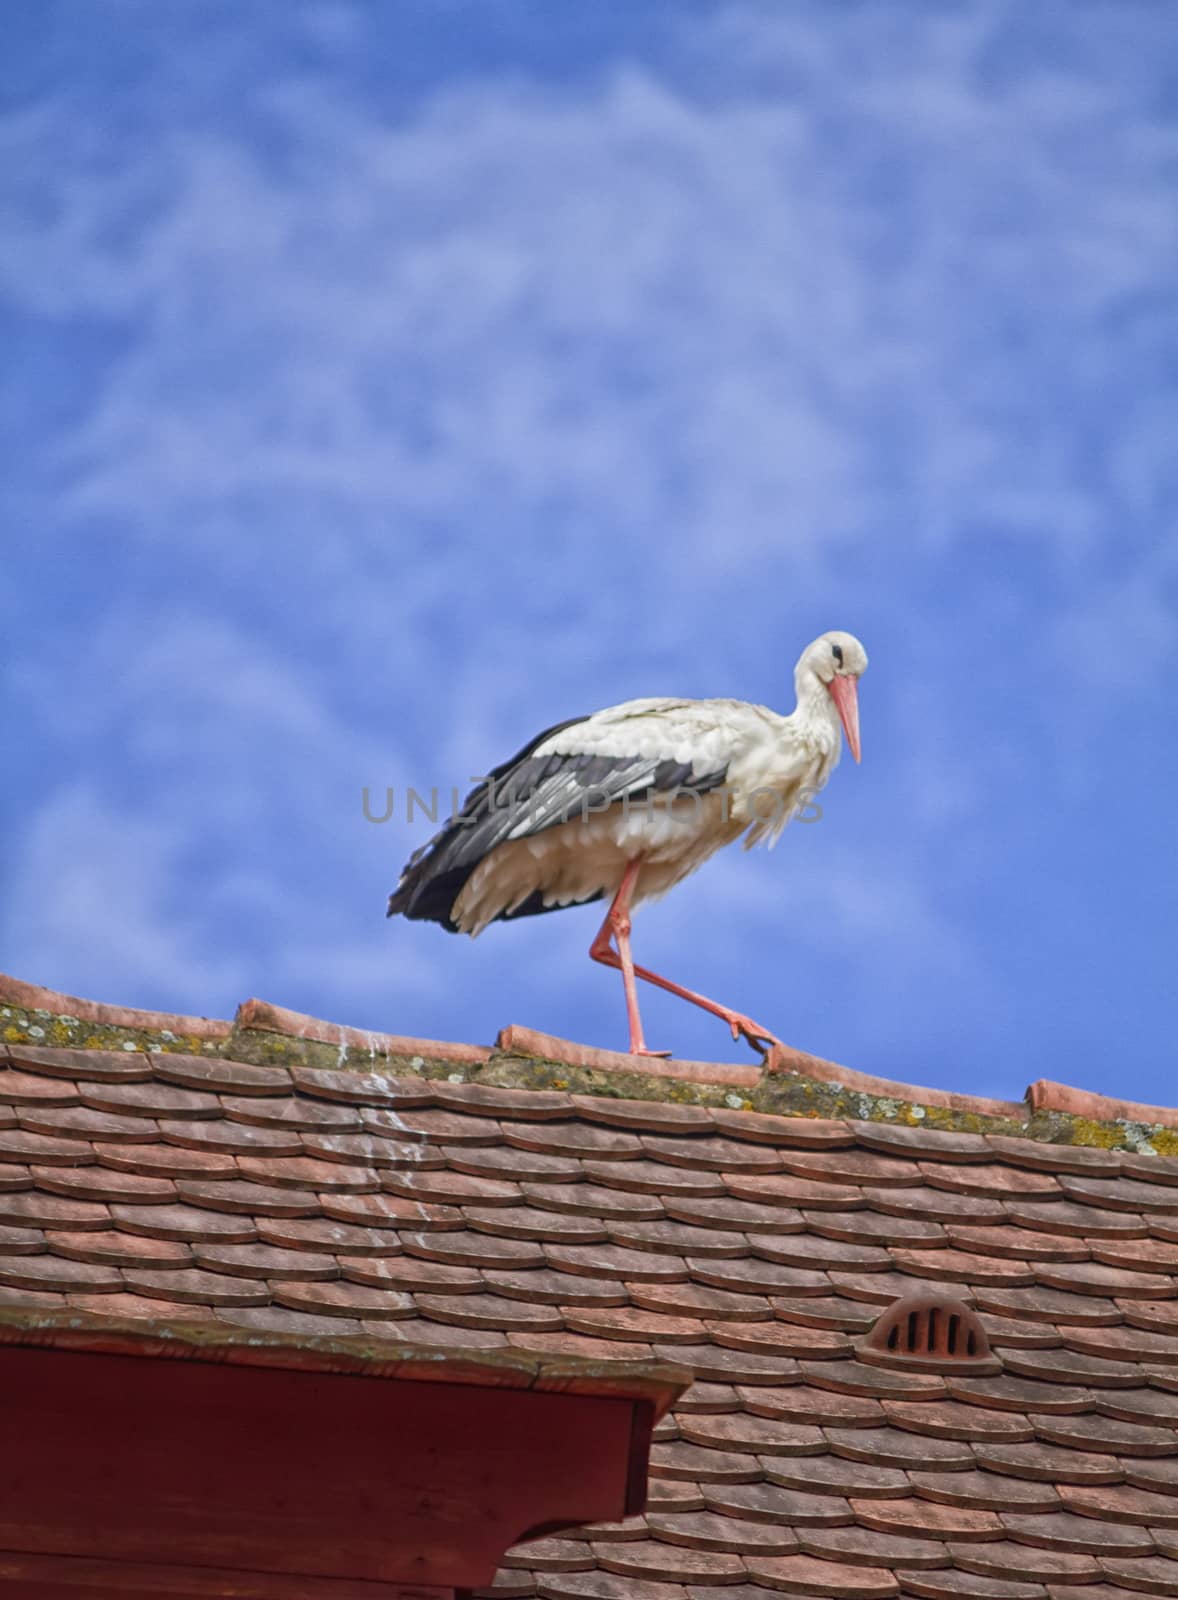 Stork walking on a roof by mariephotos